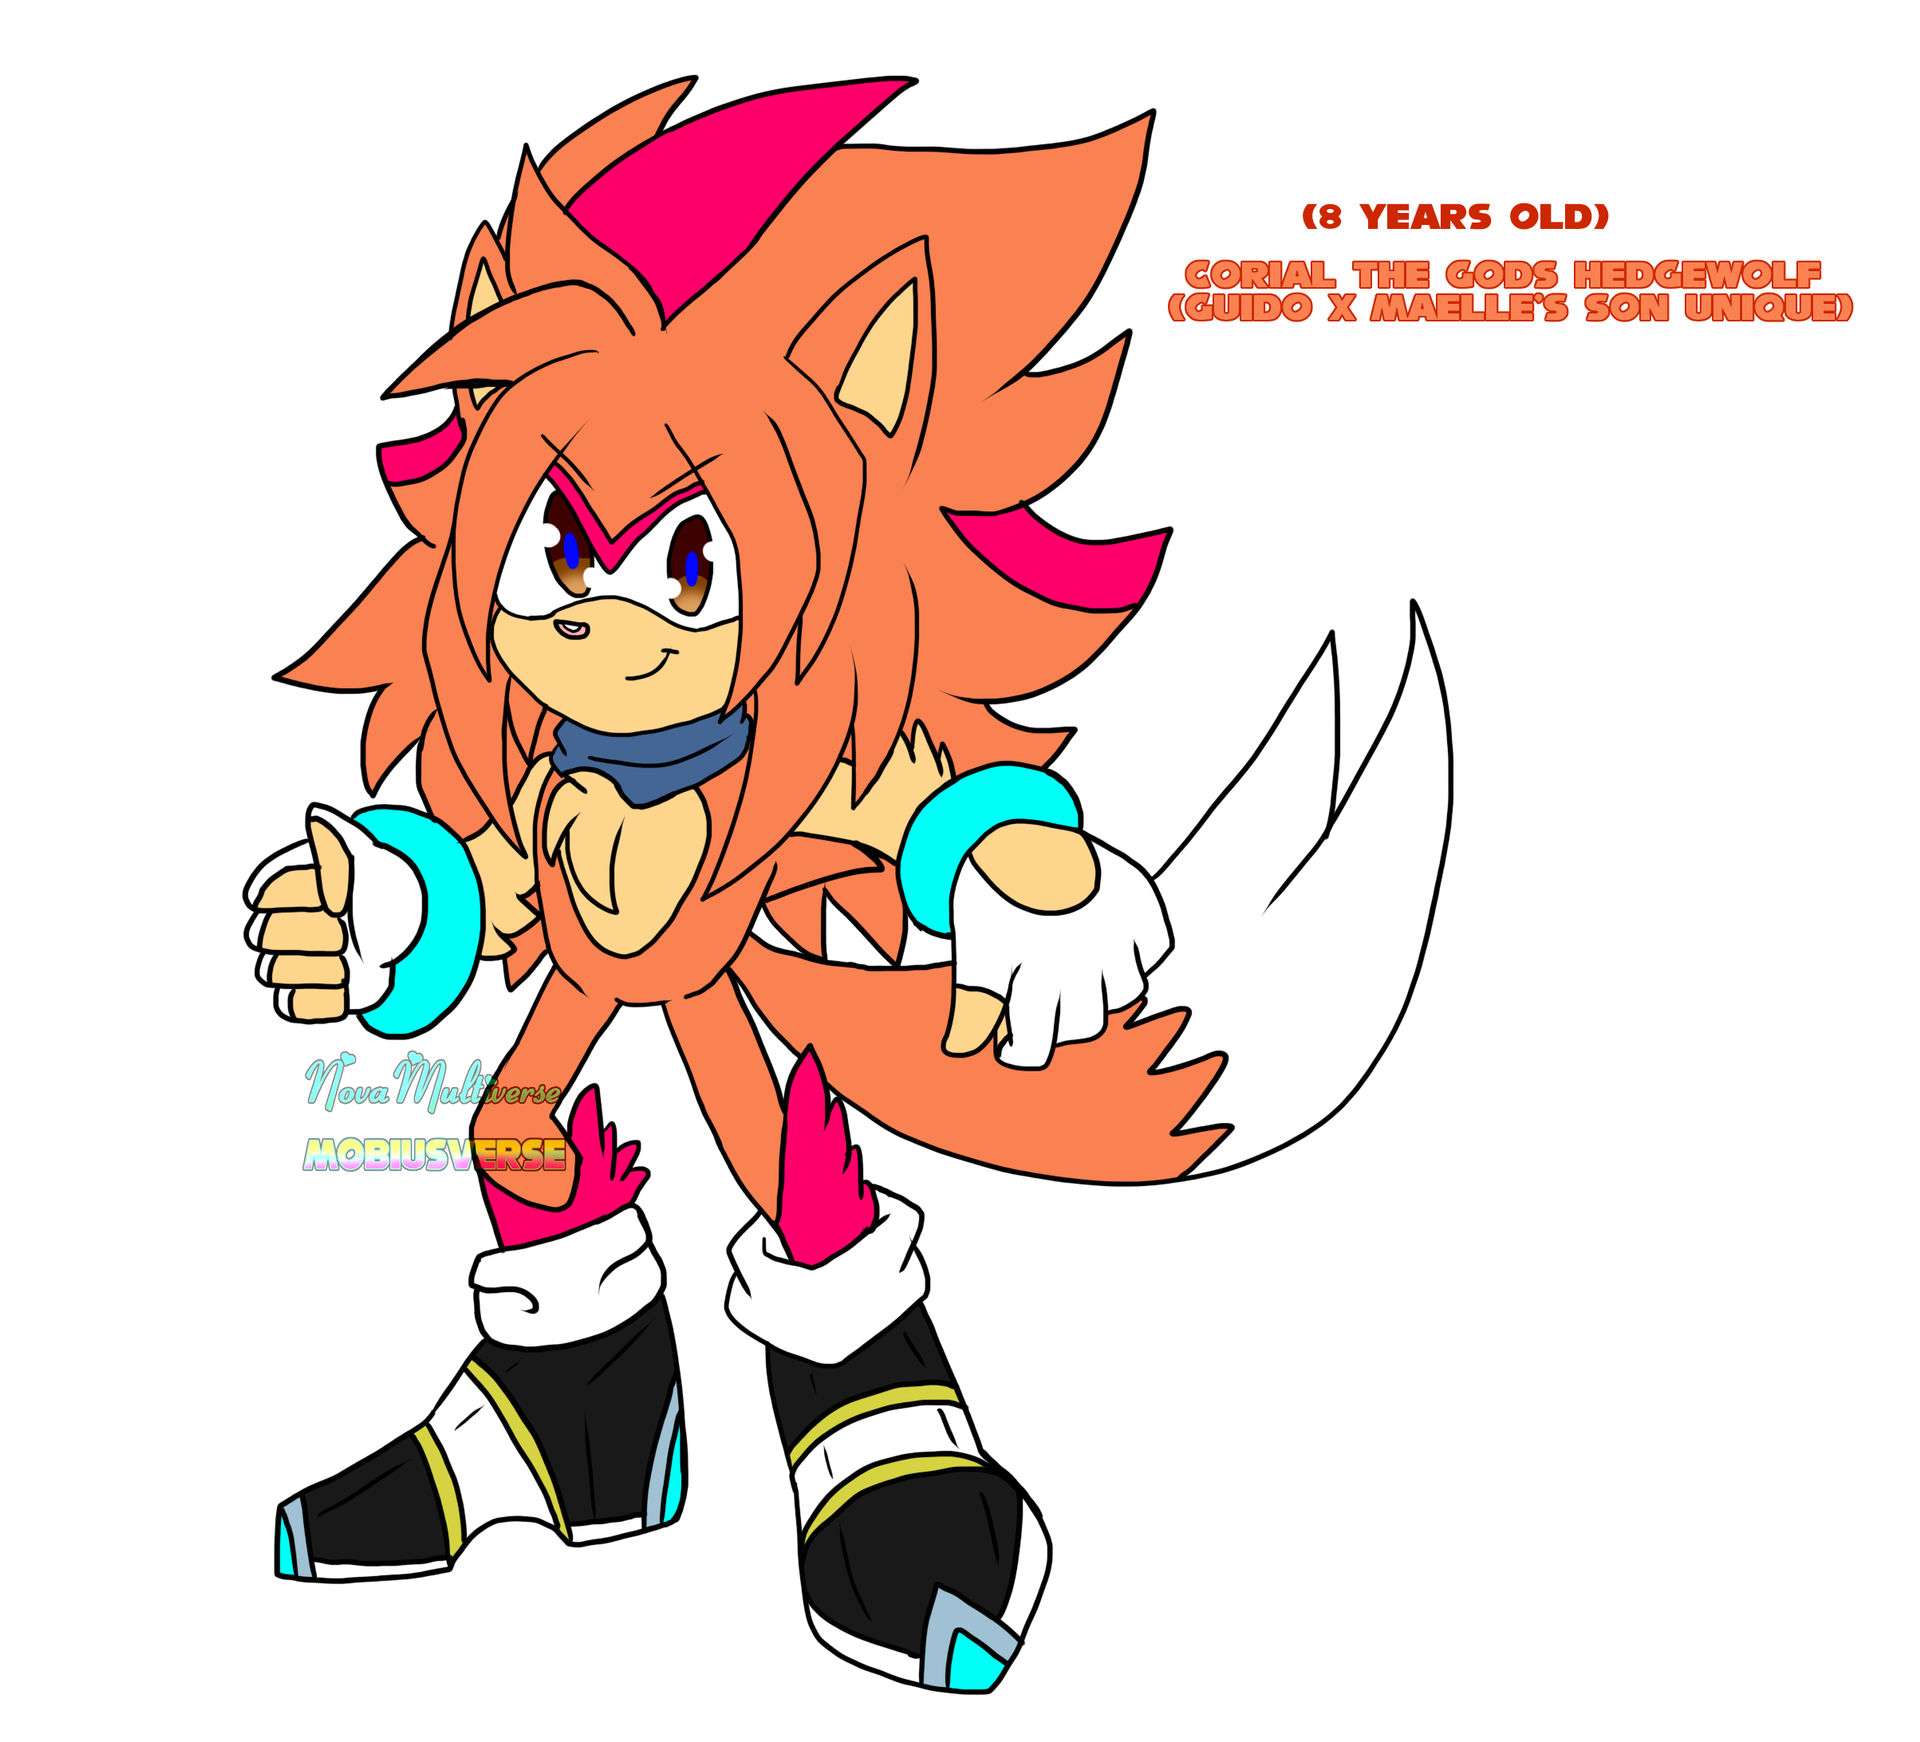 Future X/Sonic.exe:.: by NovaEXEVerse on DeviantArt